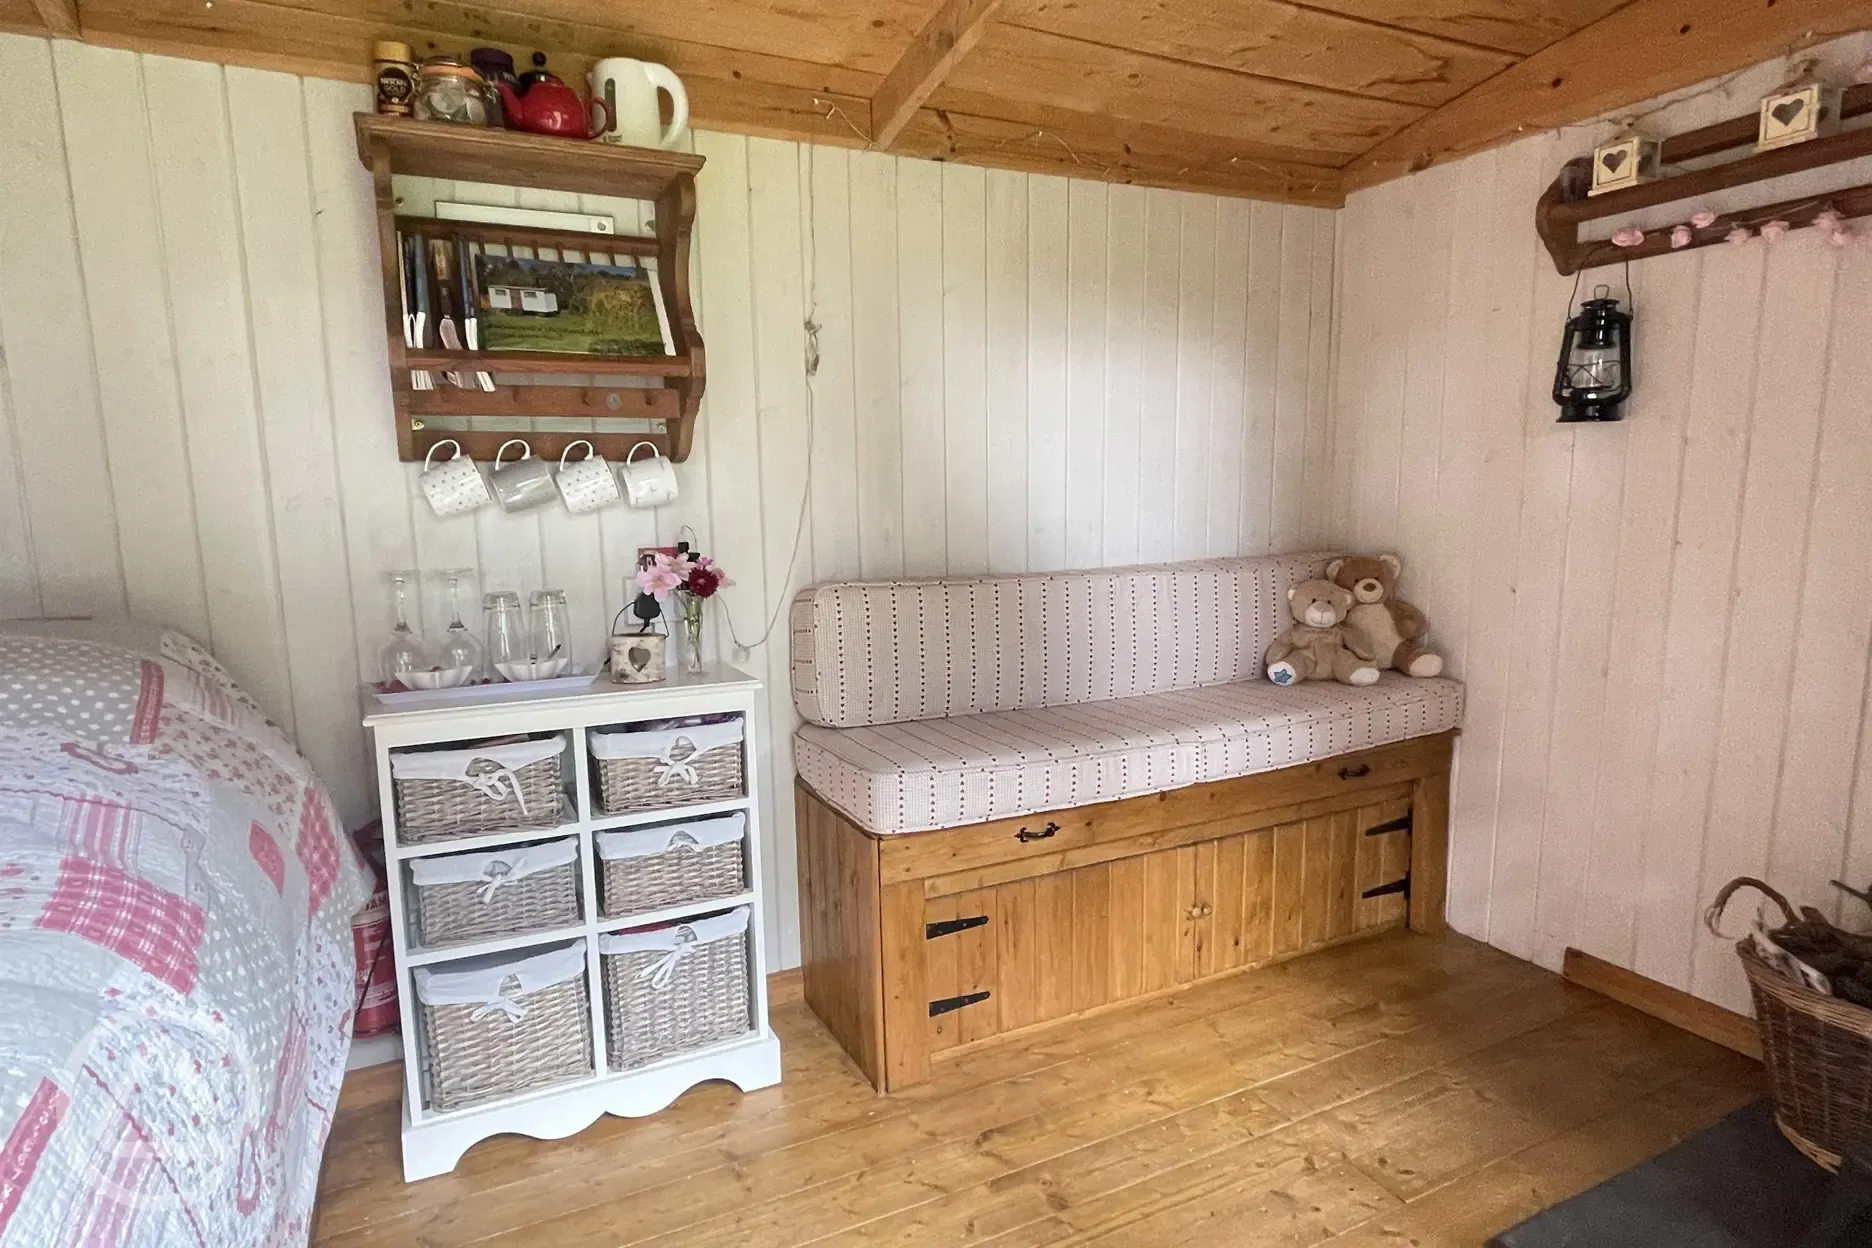 Shepherds hut interior showing bench seat which can be pulled out wider for a child to sleep on